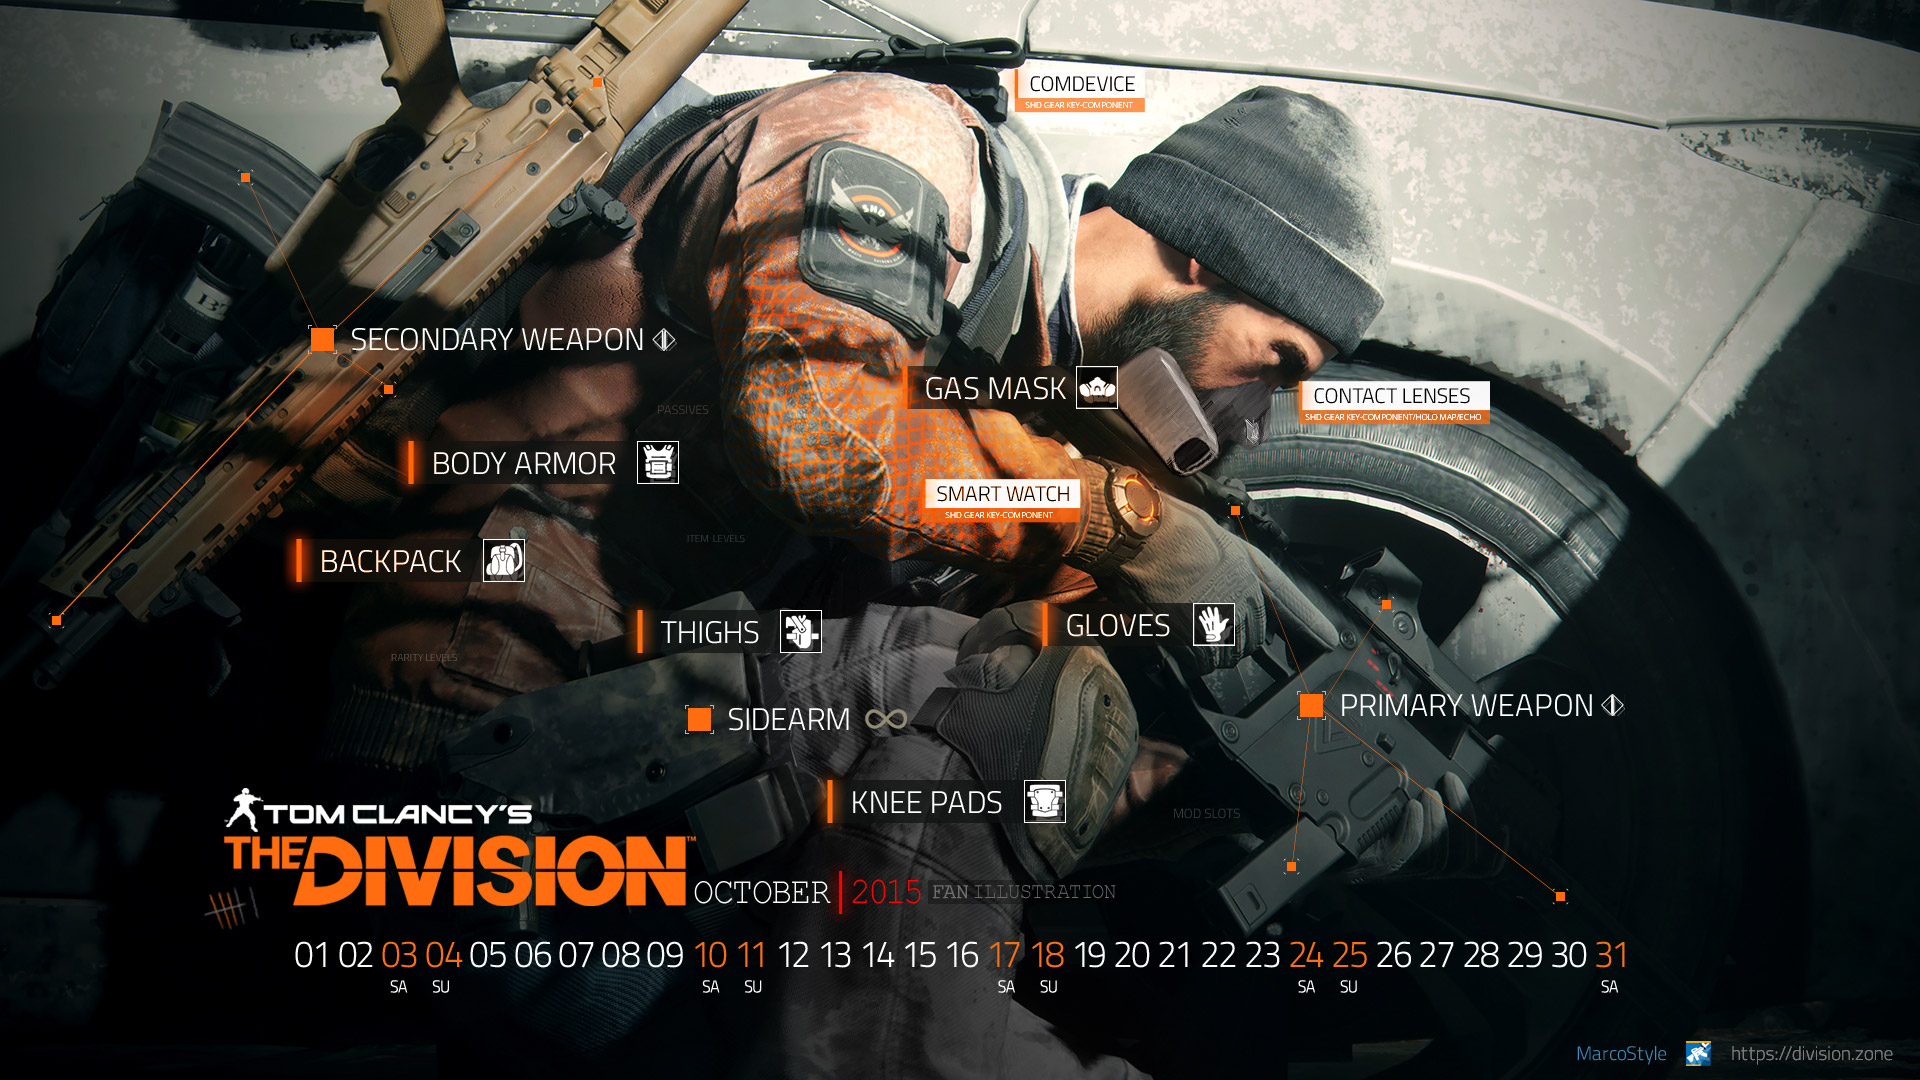 🔥 Download The Division Calendar Wallpaper by rachaelh The Division